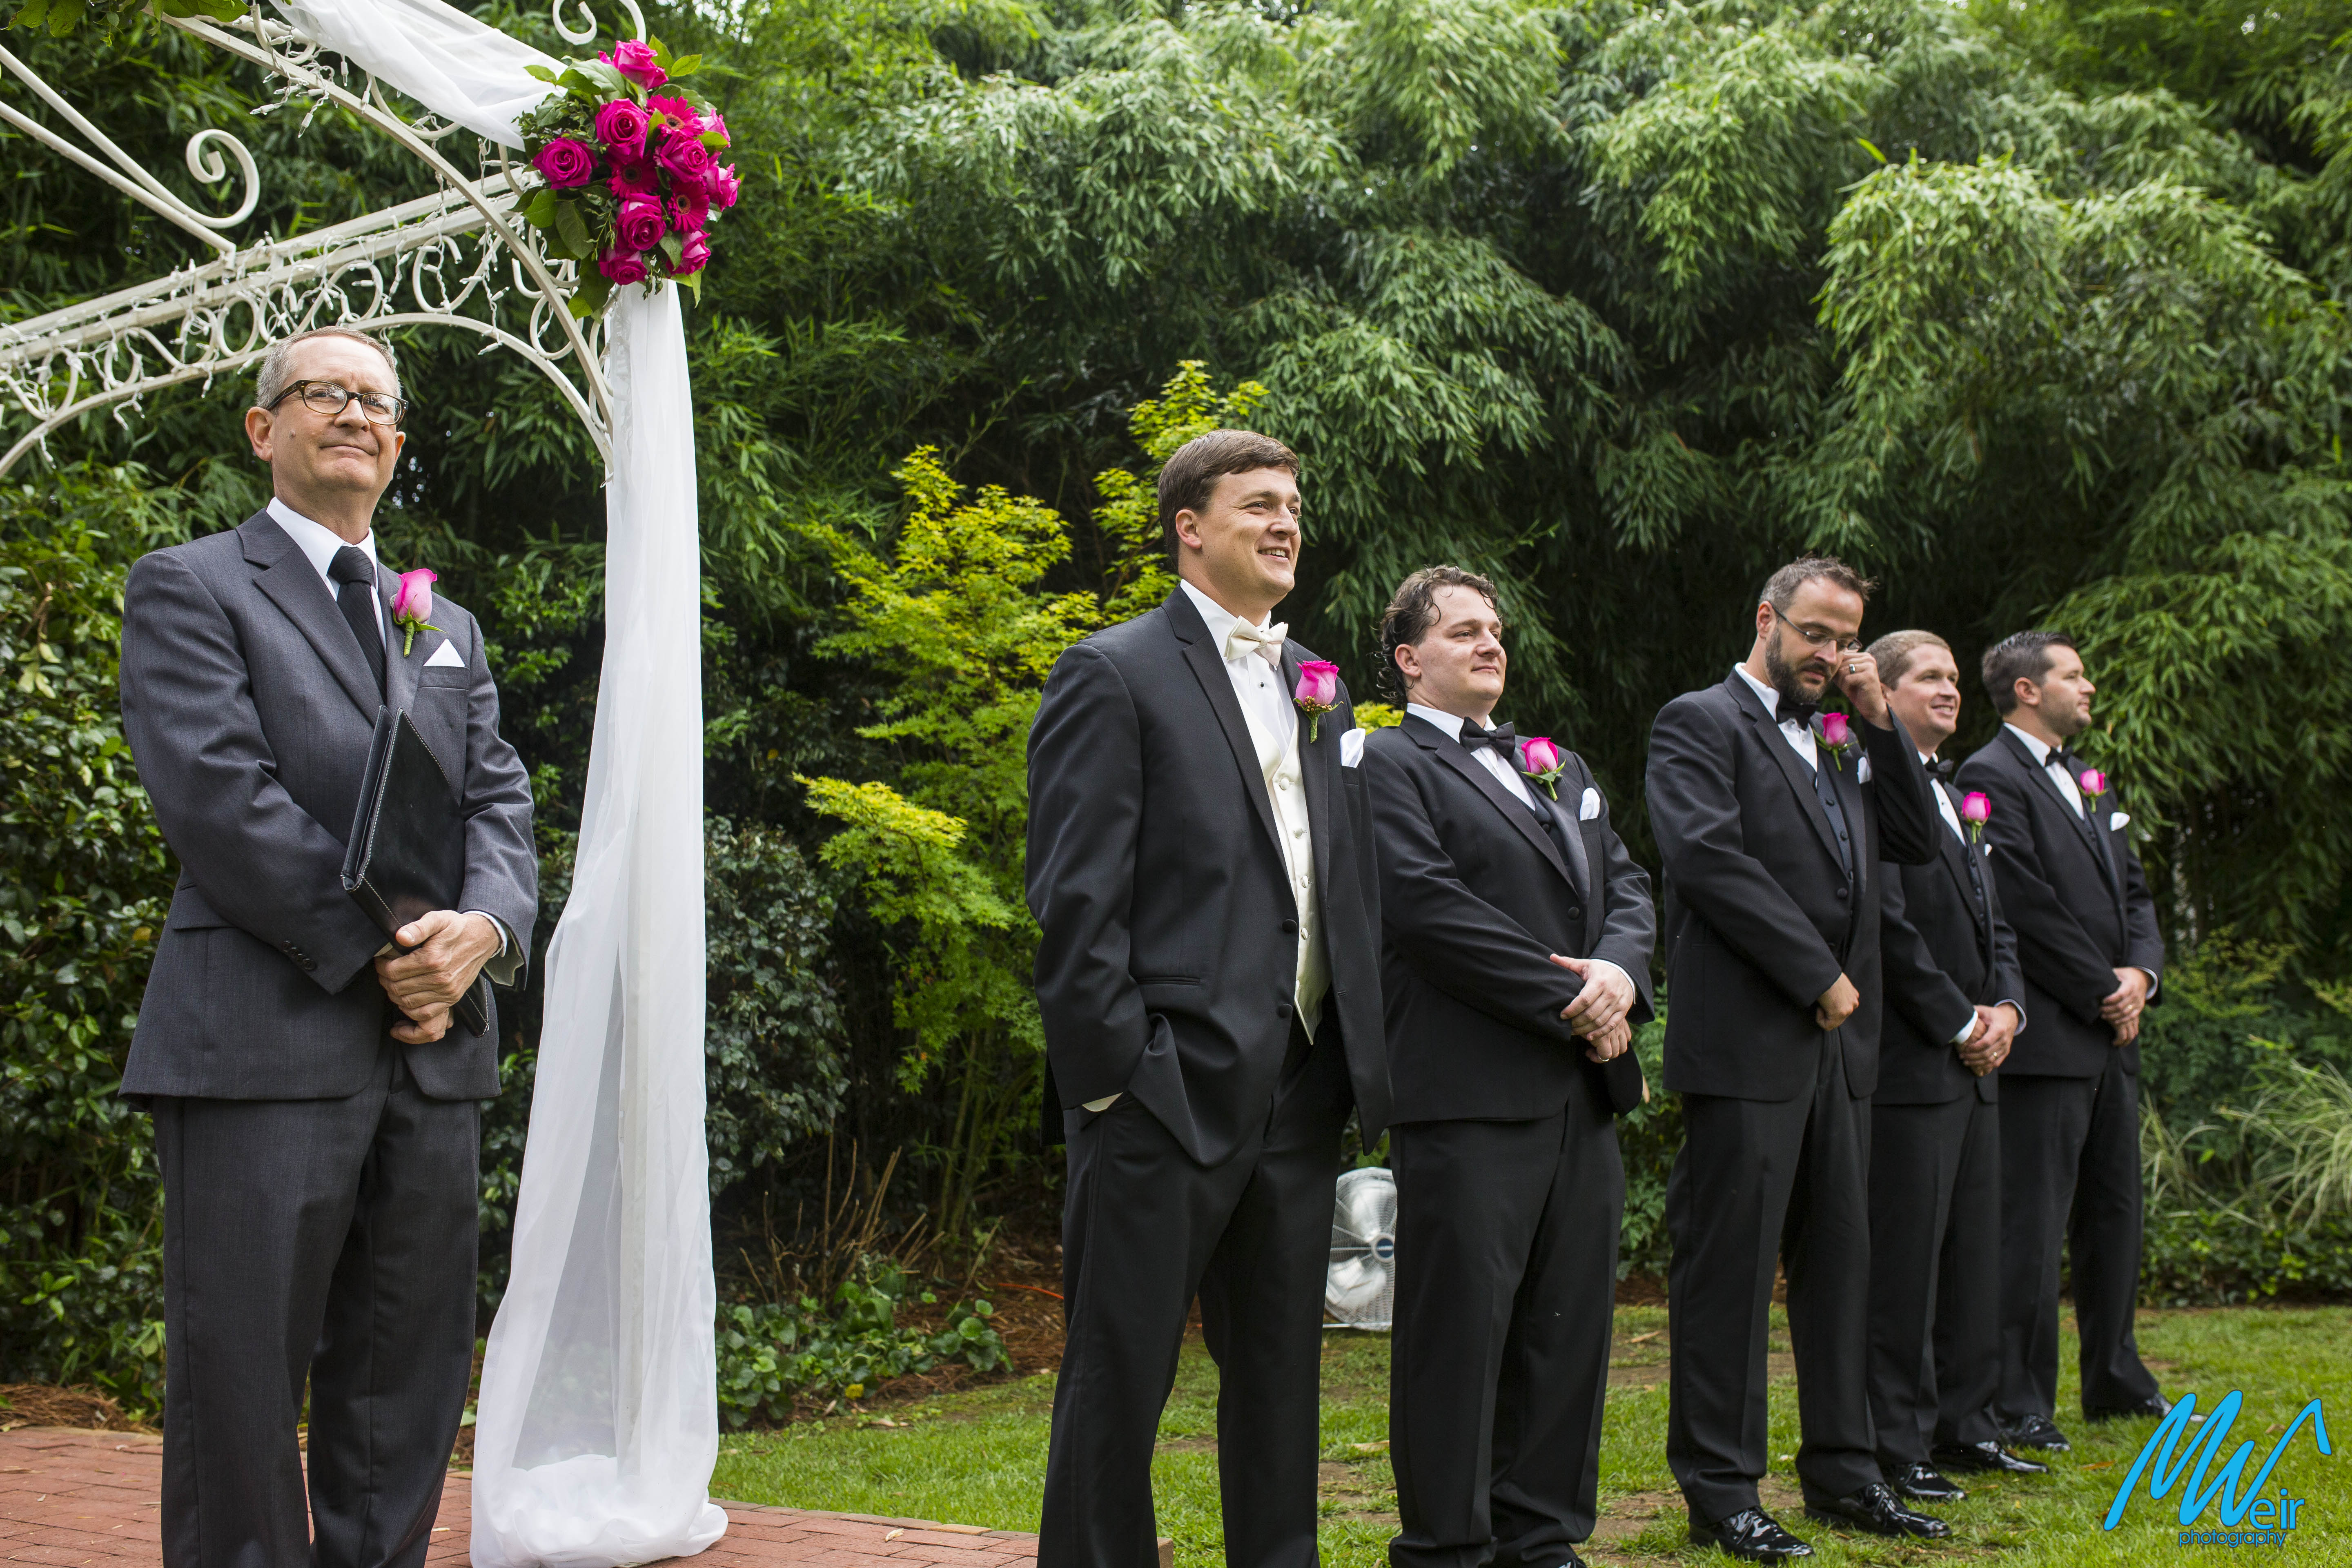 groom waiting for bride to walk down aisle